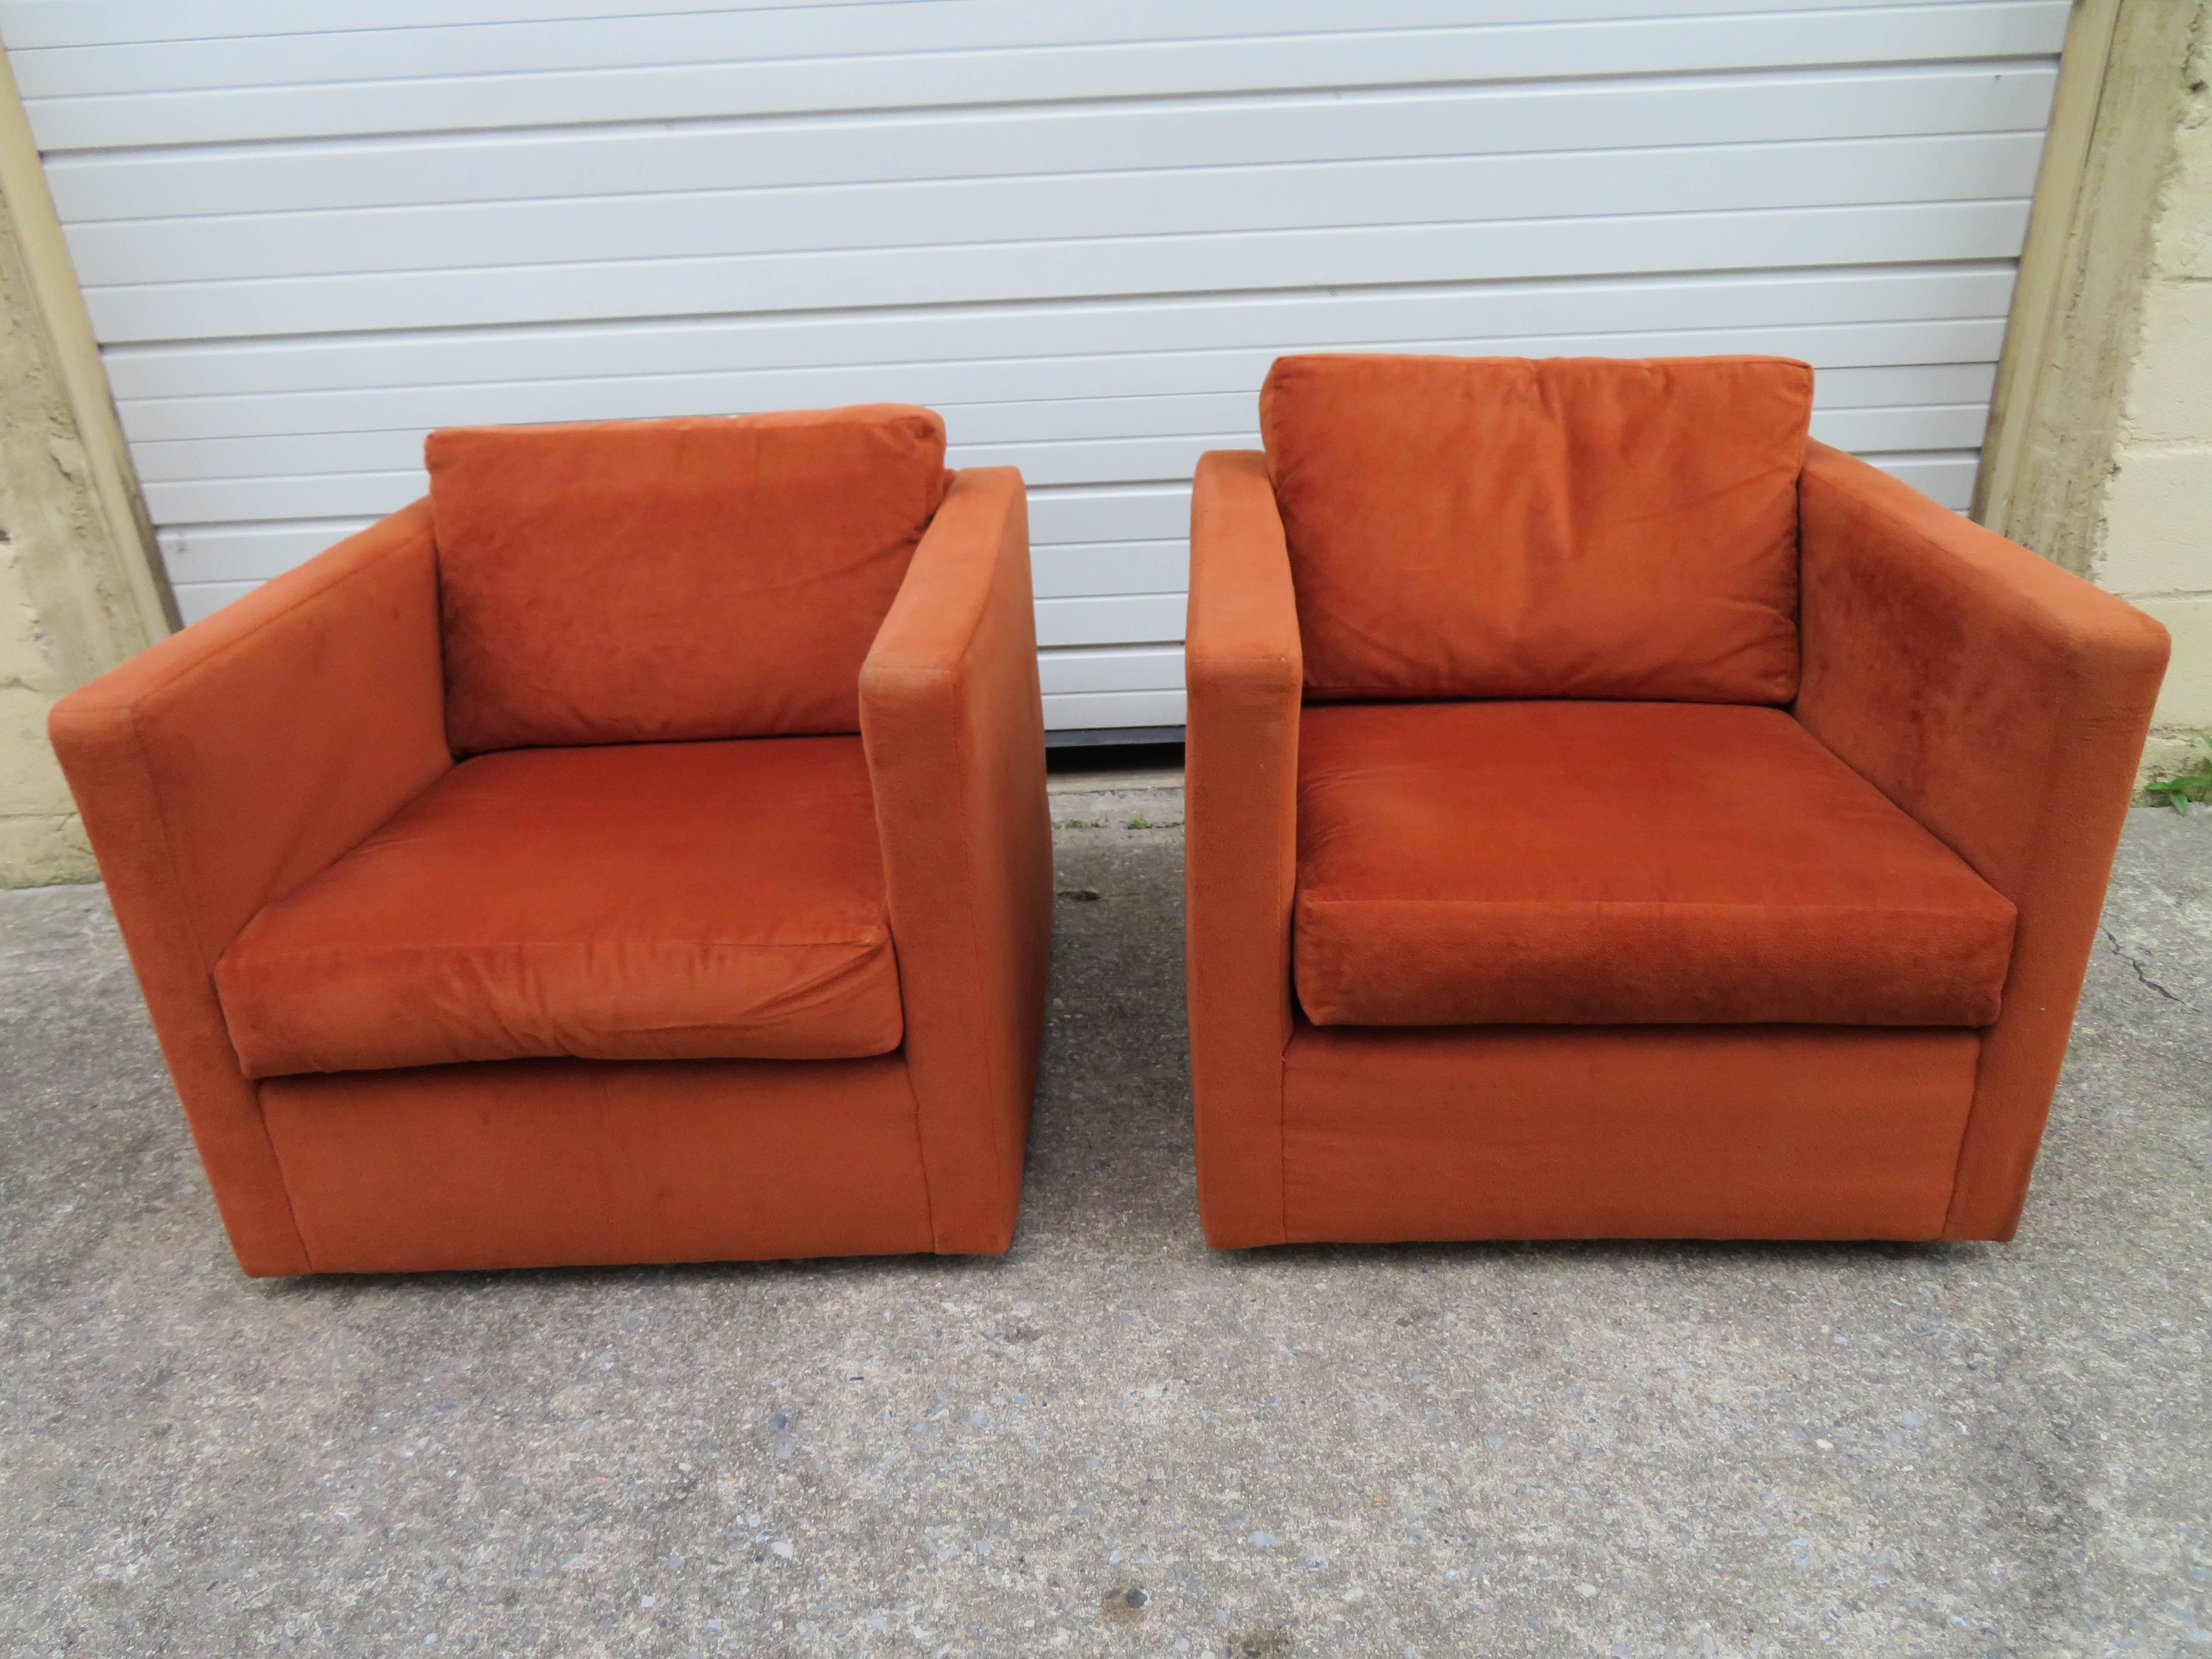 Handsome pair of Milo Baughman Thayer Coggin even arm cube chairs. This pair retain their original woven orange fabric in worn condition-reupholstery is recommended. Chairs have short stubby wooden legs-very nice.